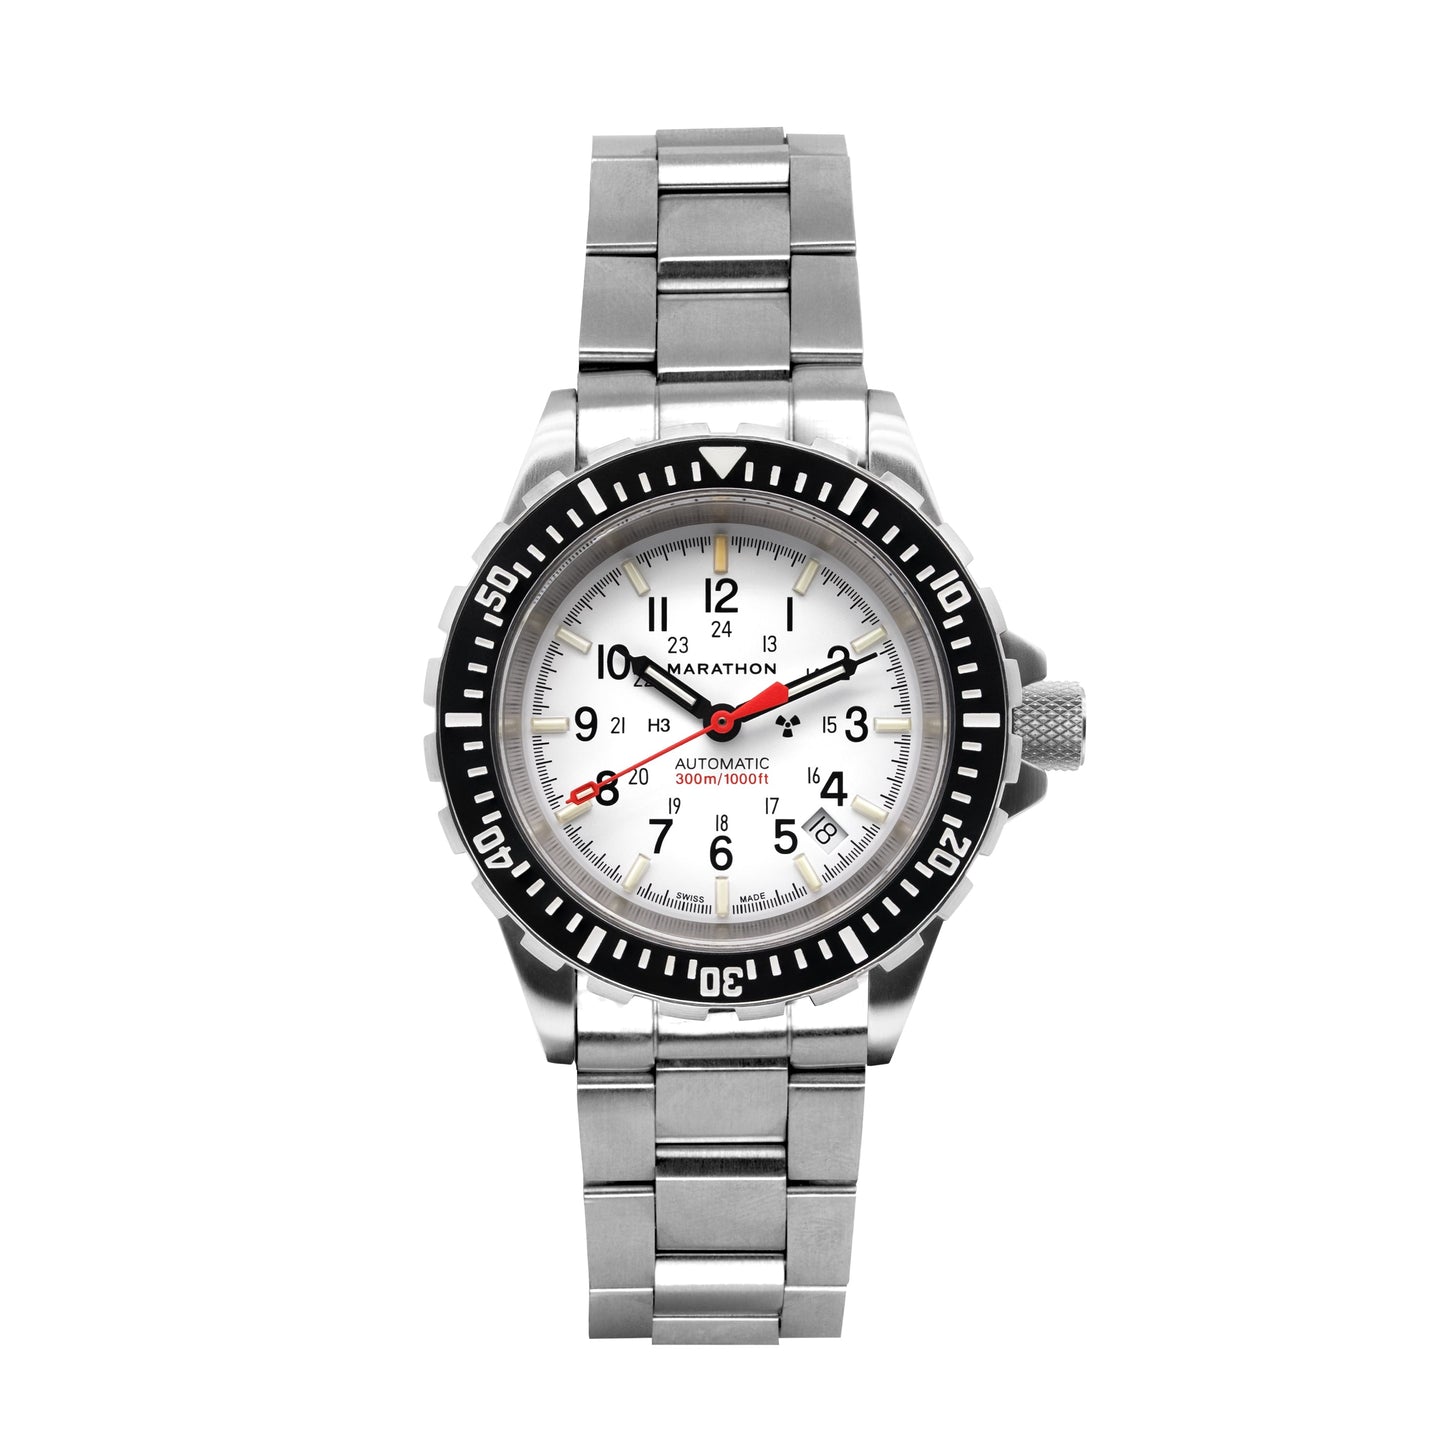 ARCTIC EDITION LARGE DIVER'S AUTOMATIC (GSAR) WITH STAINLESS STEEL BRACELET - 41MM